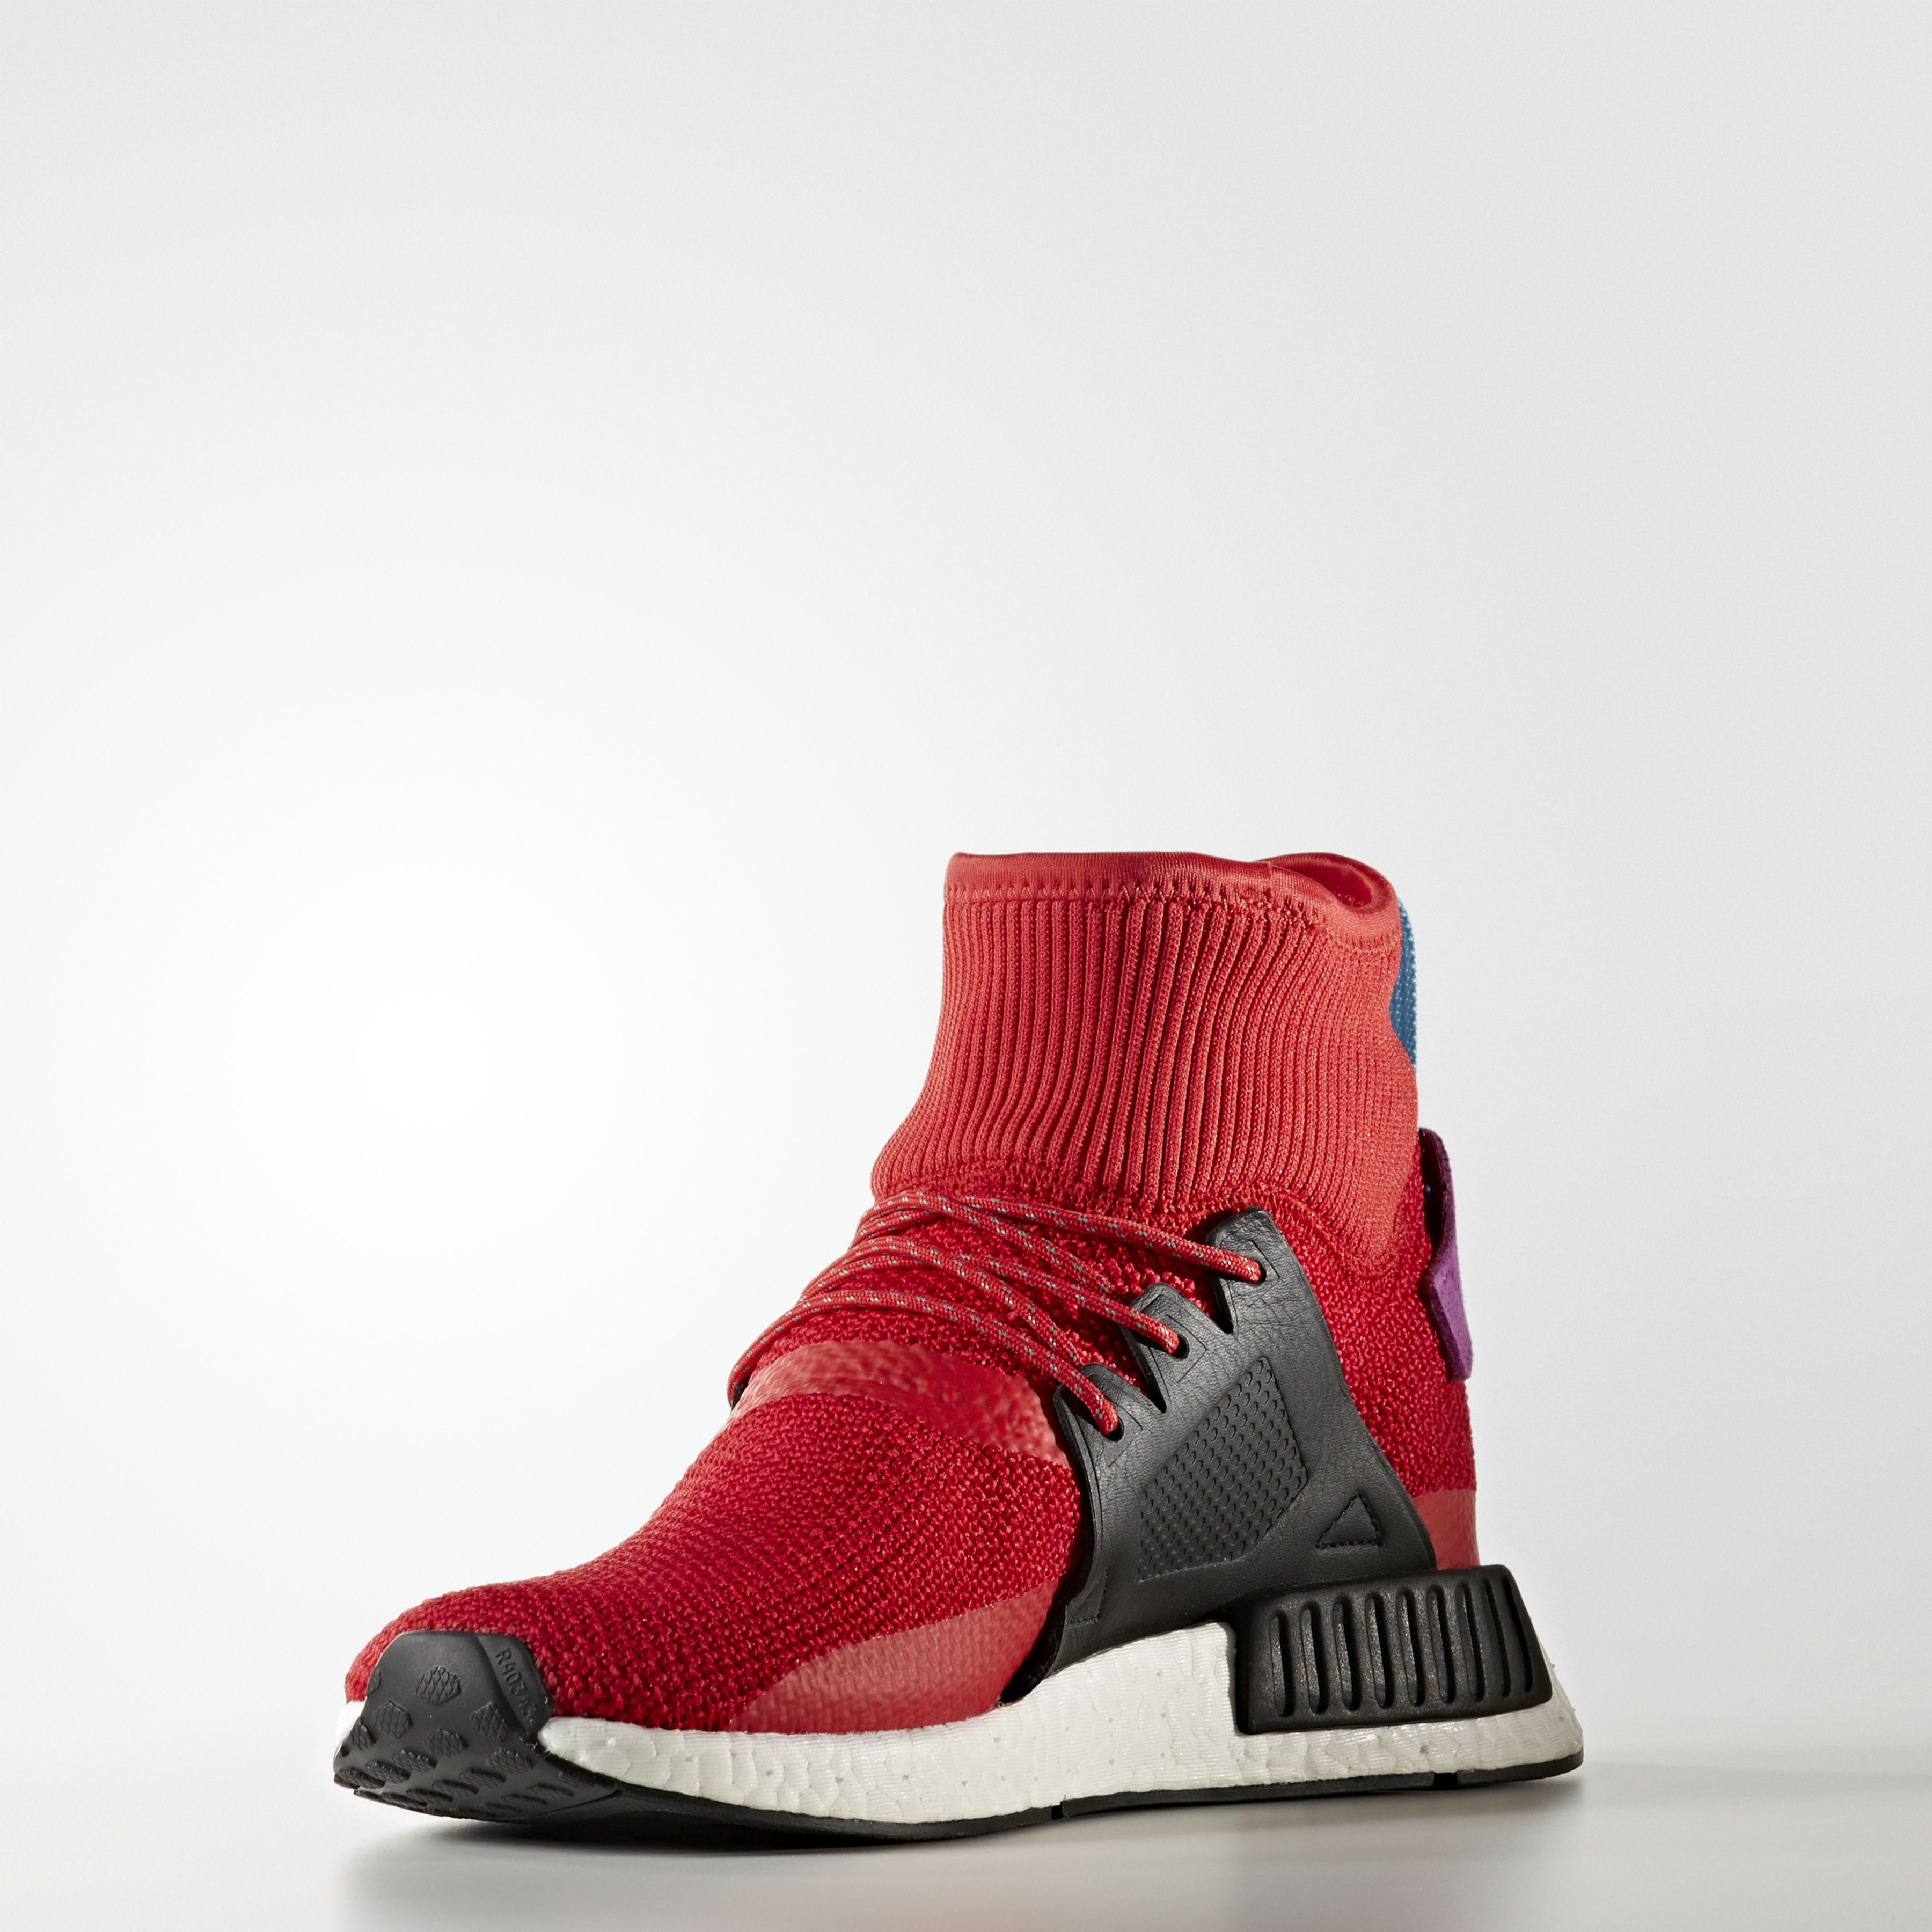 Confirmed Release Info for the adidas NMD XR1 PK 'Cor.